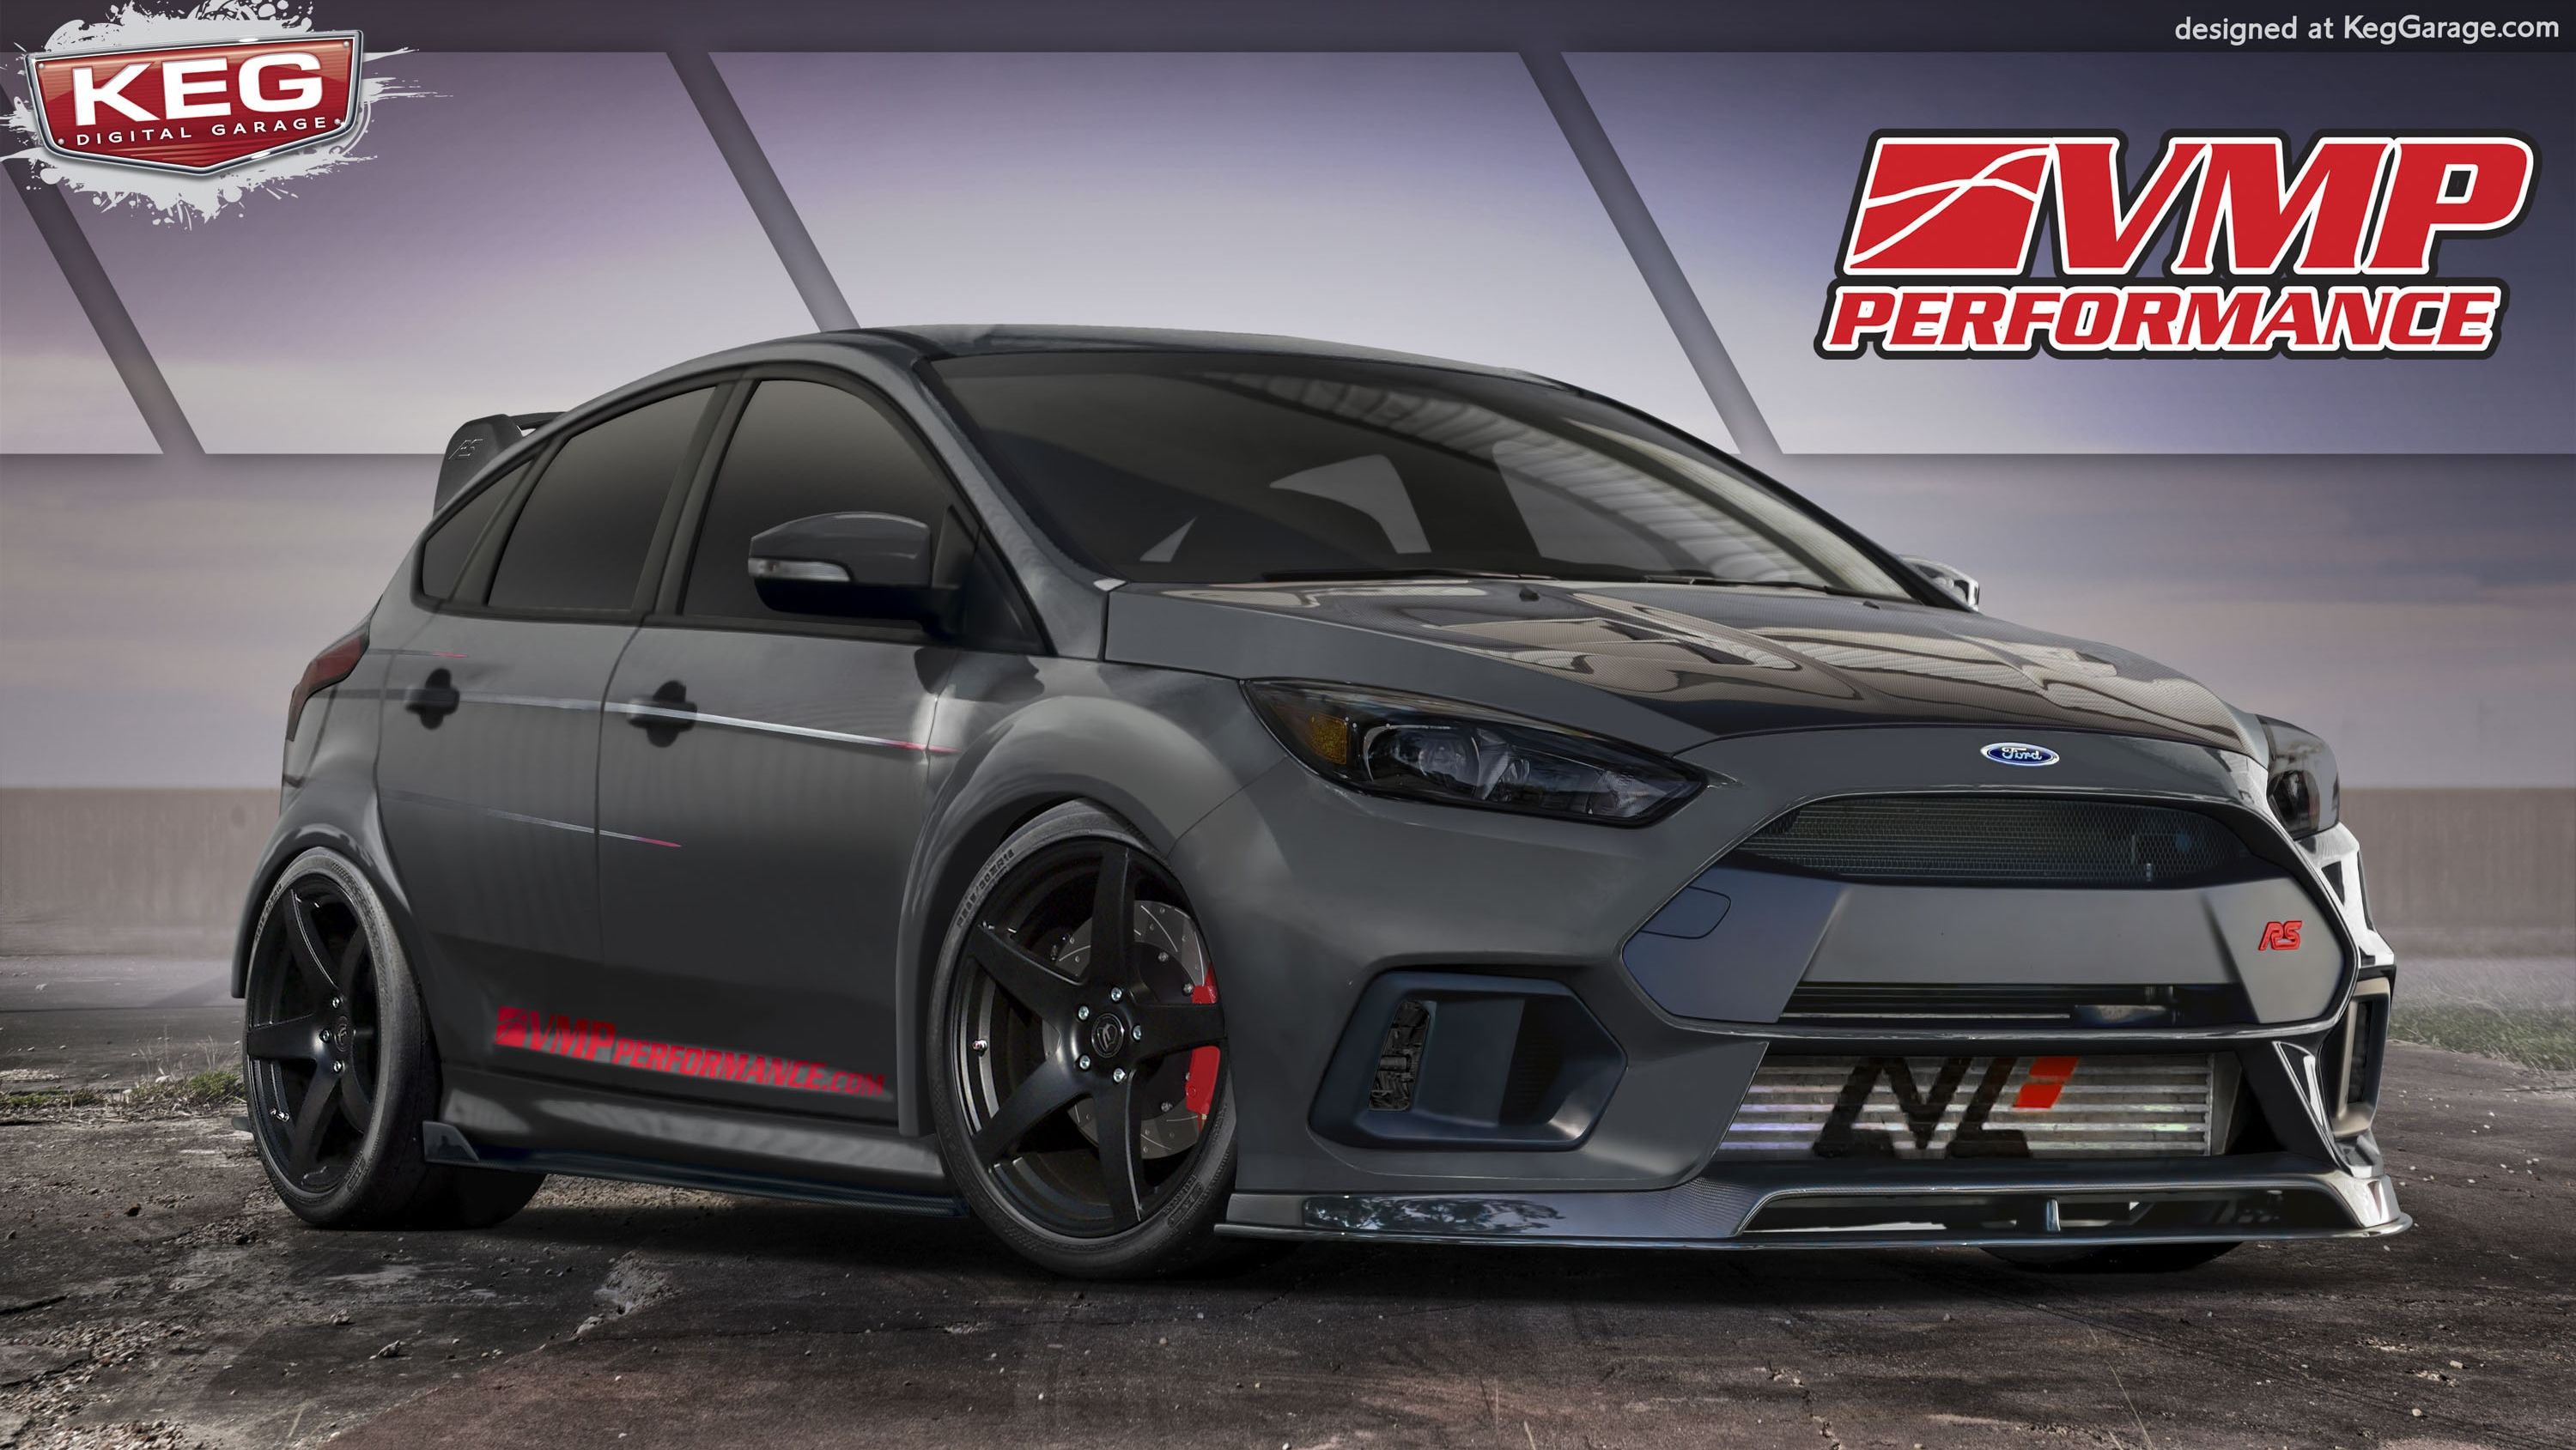 2017 Ford Focus RS “TriAthlete” by VMP Performance